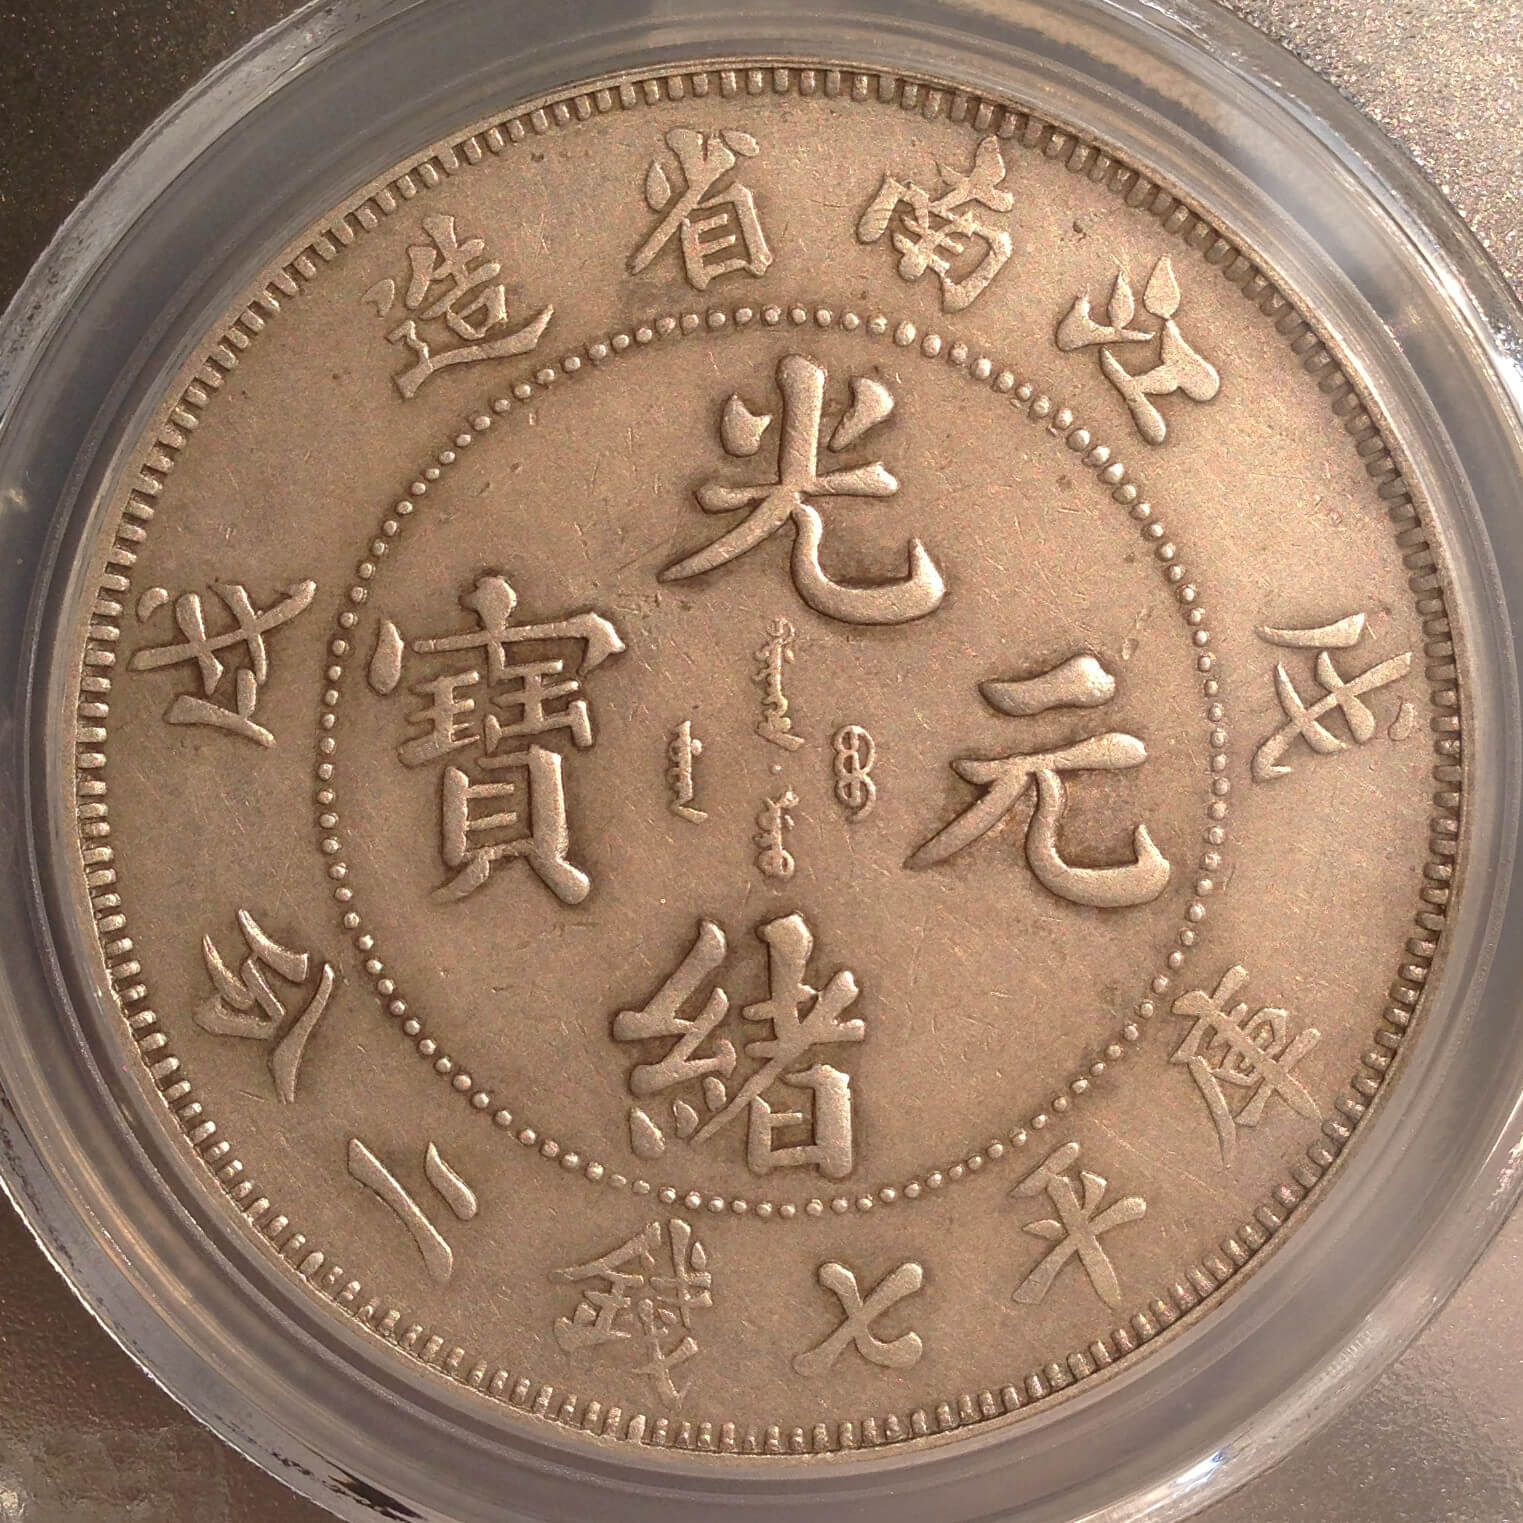 chinese coins worth money